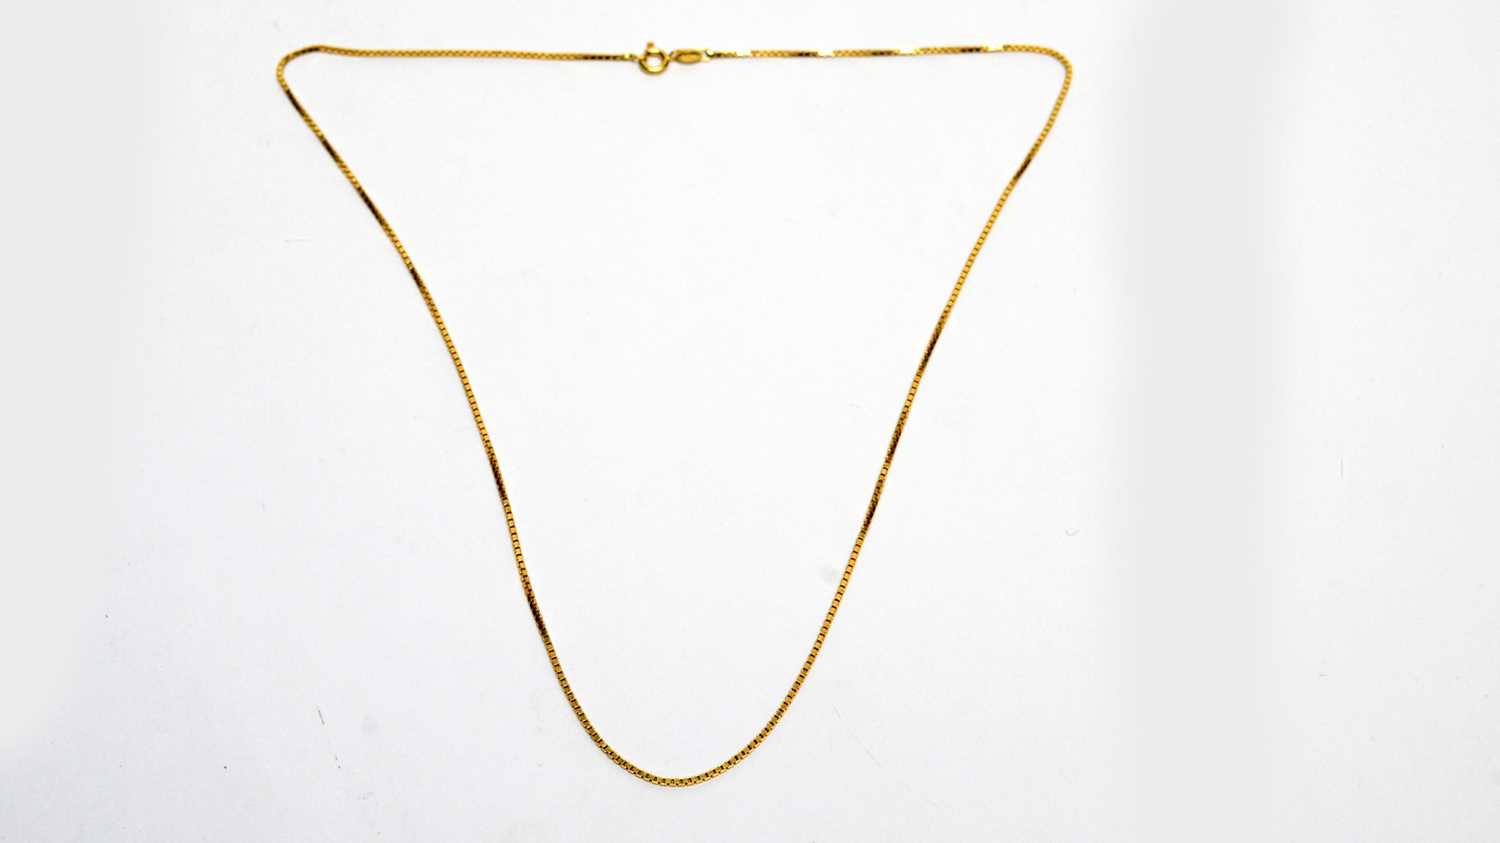 Lot 184 - An 18ct yellow gold fine link necklace